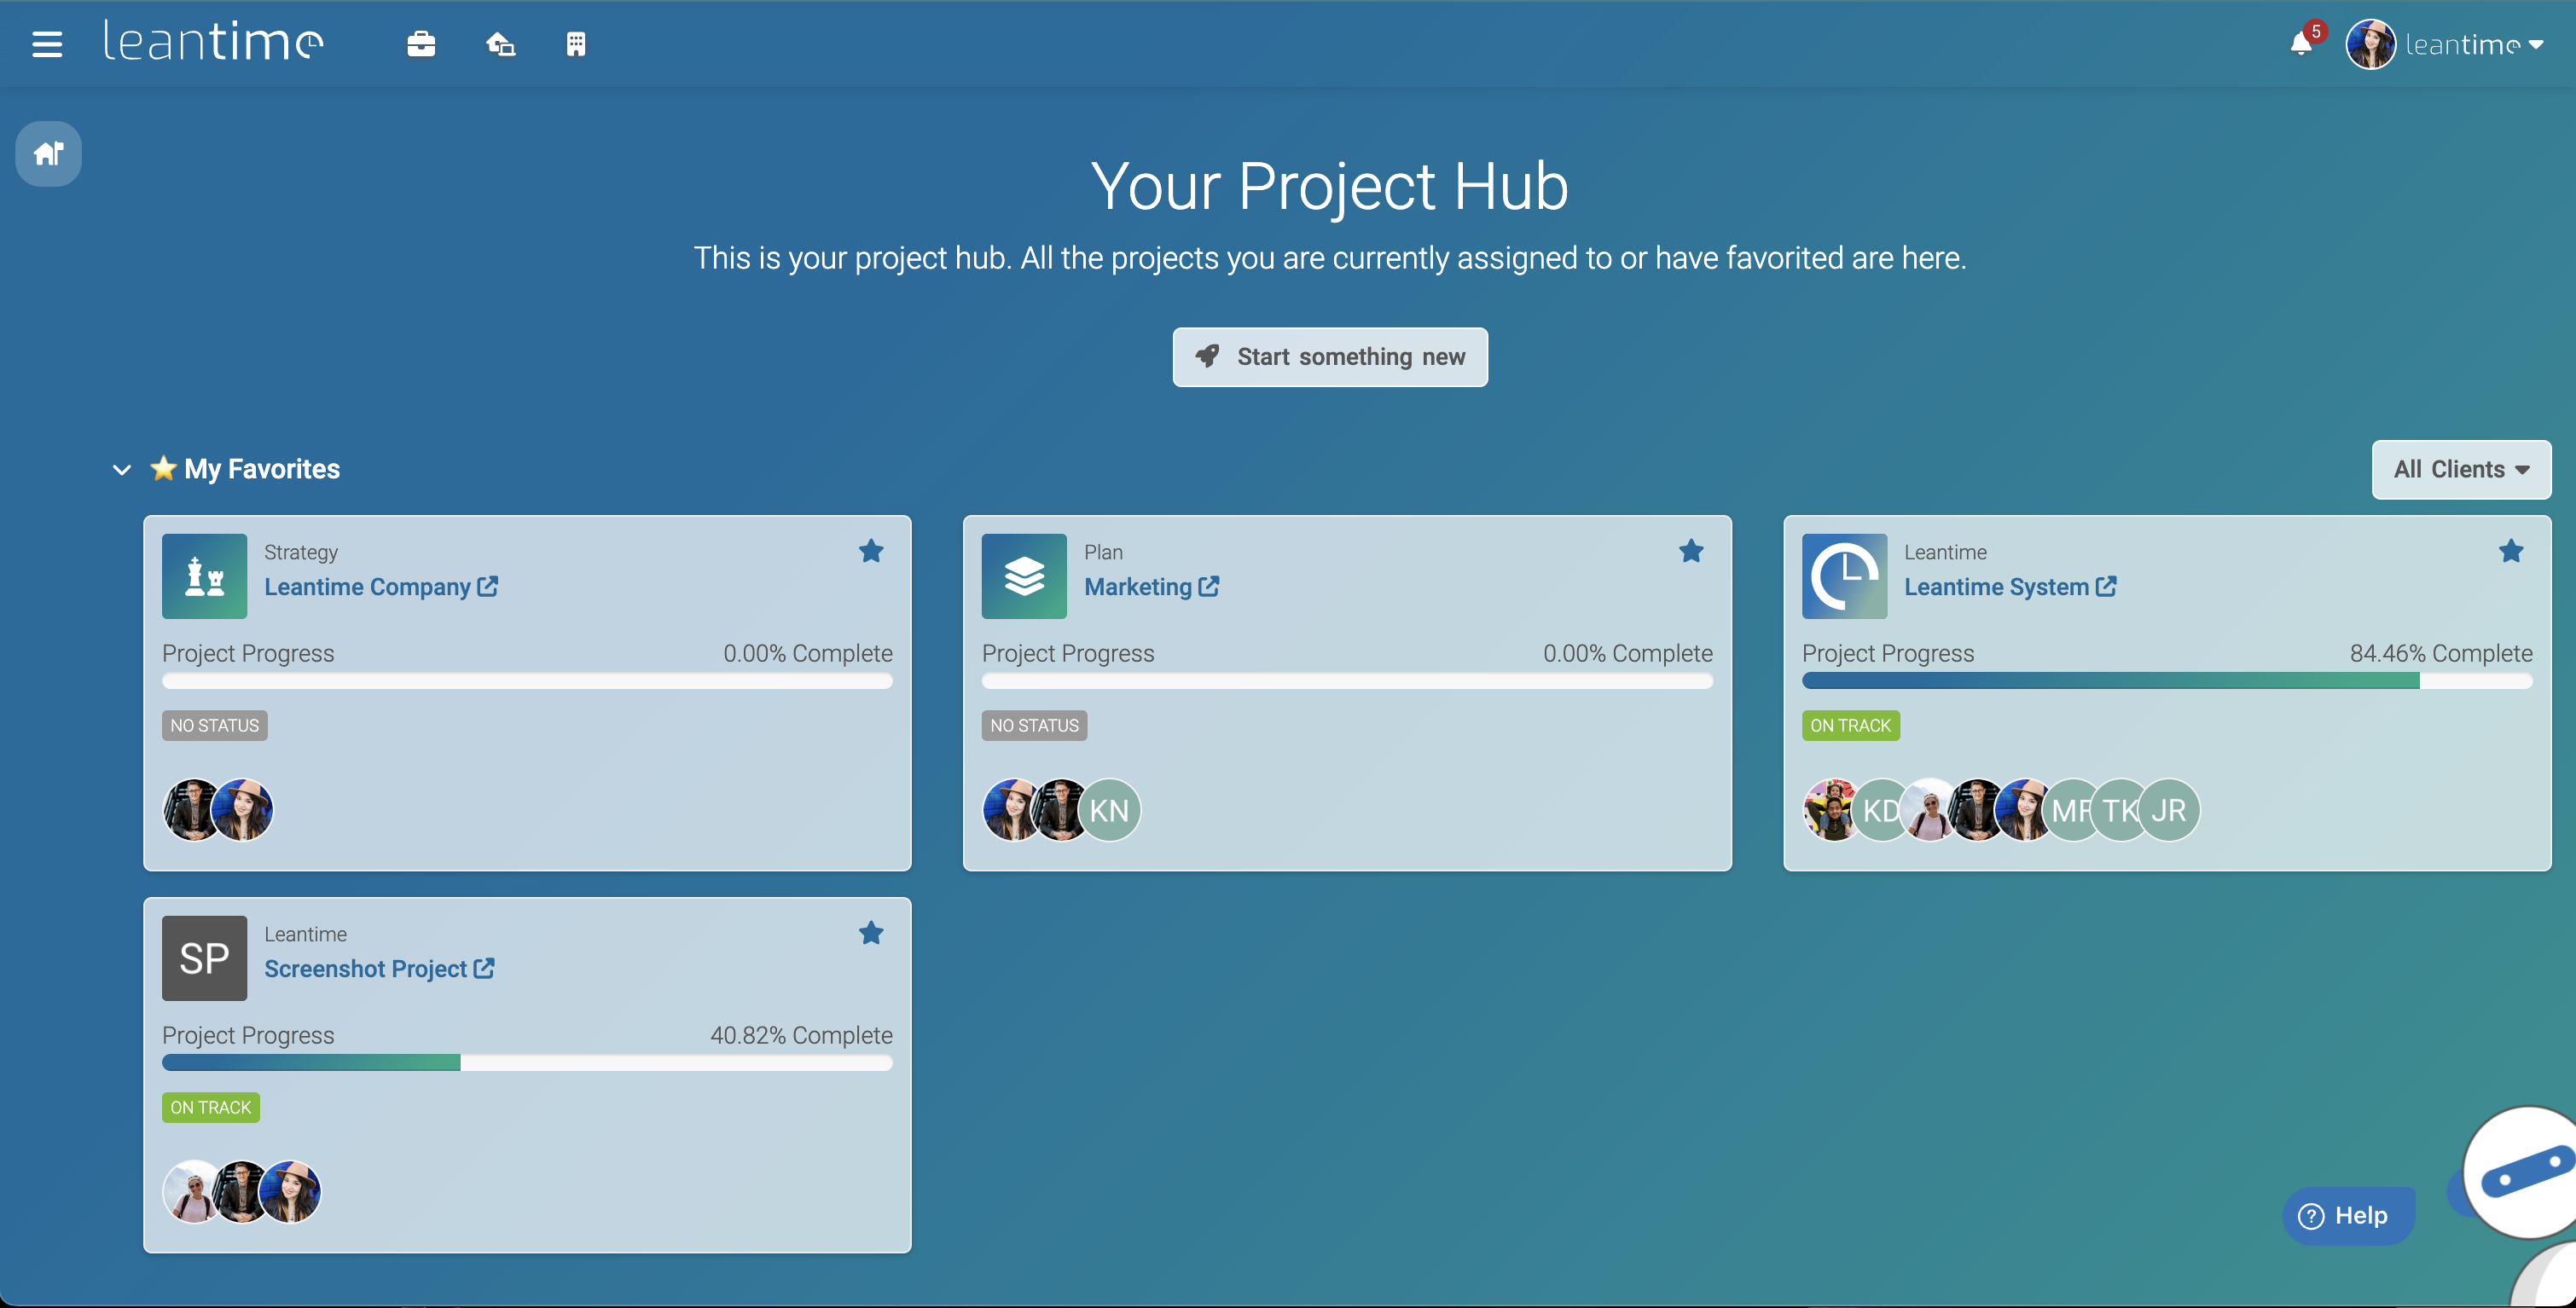 Project Hub in Leantime to Visualize the Projects Overview